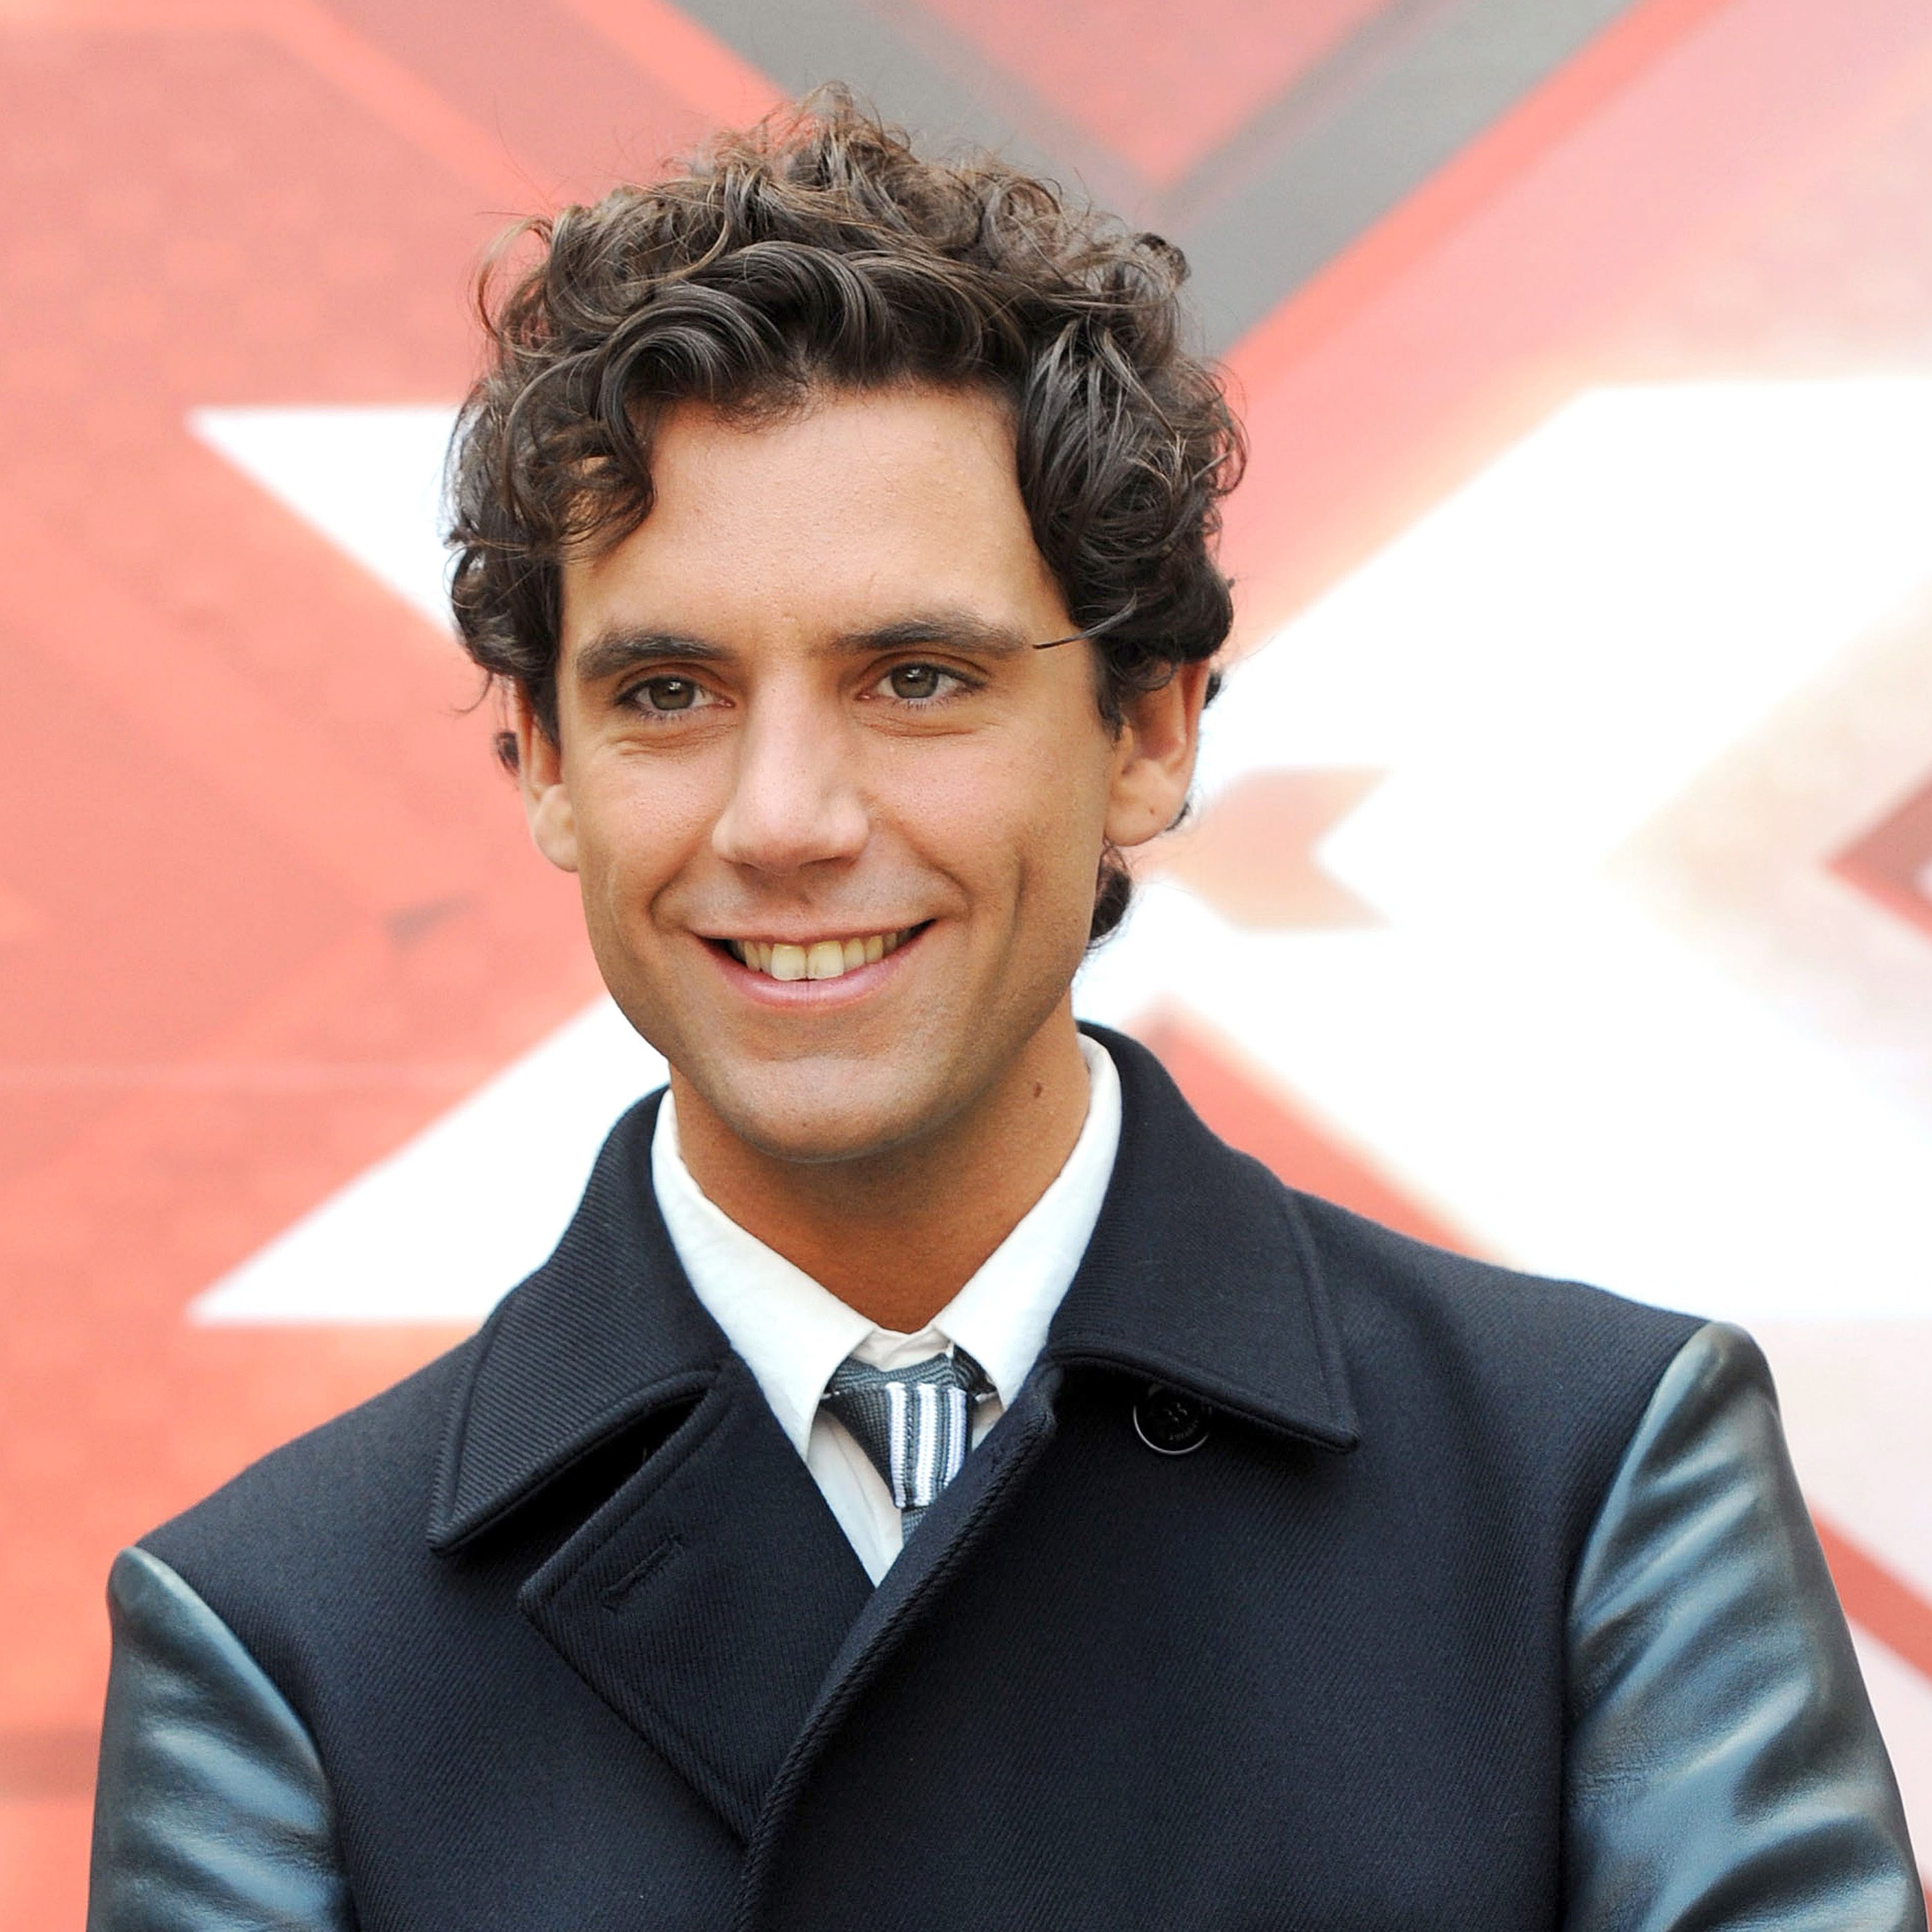 Mika's Curly Hair